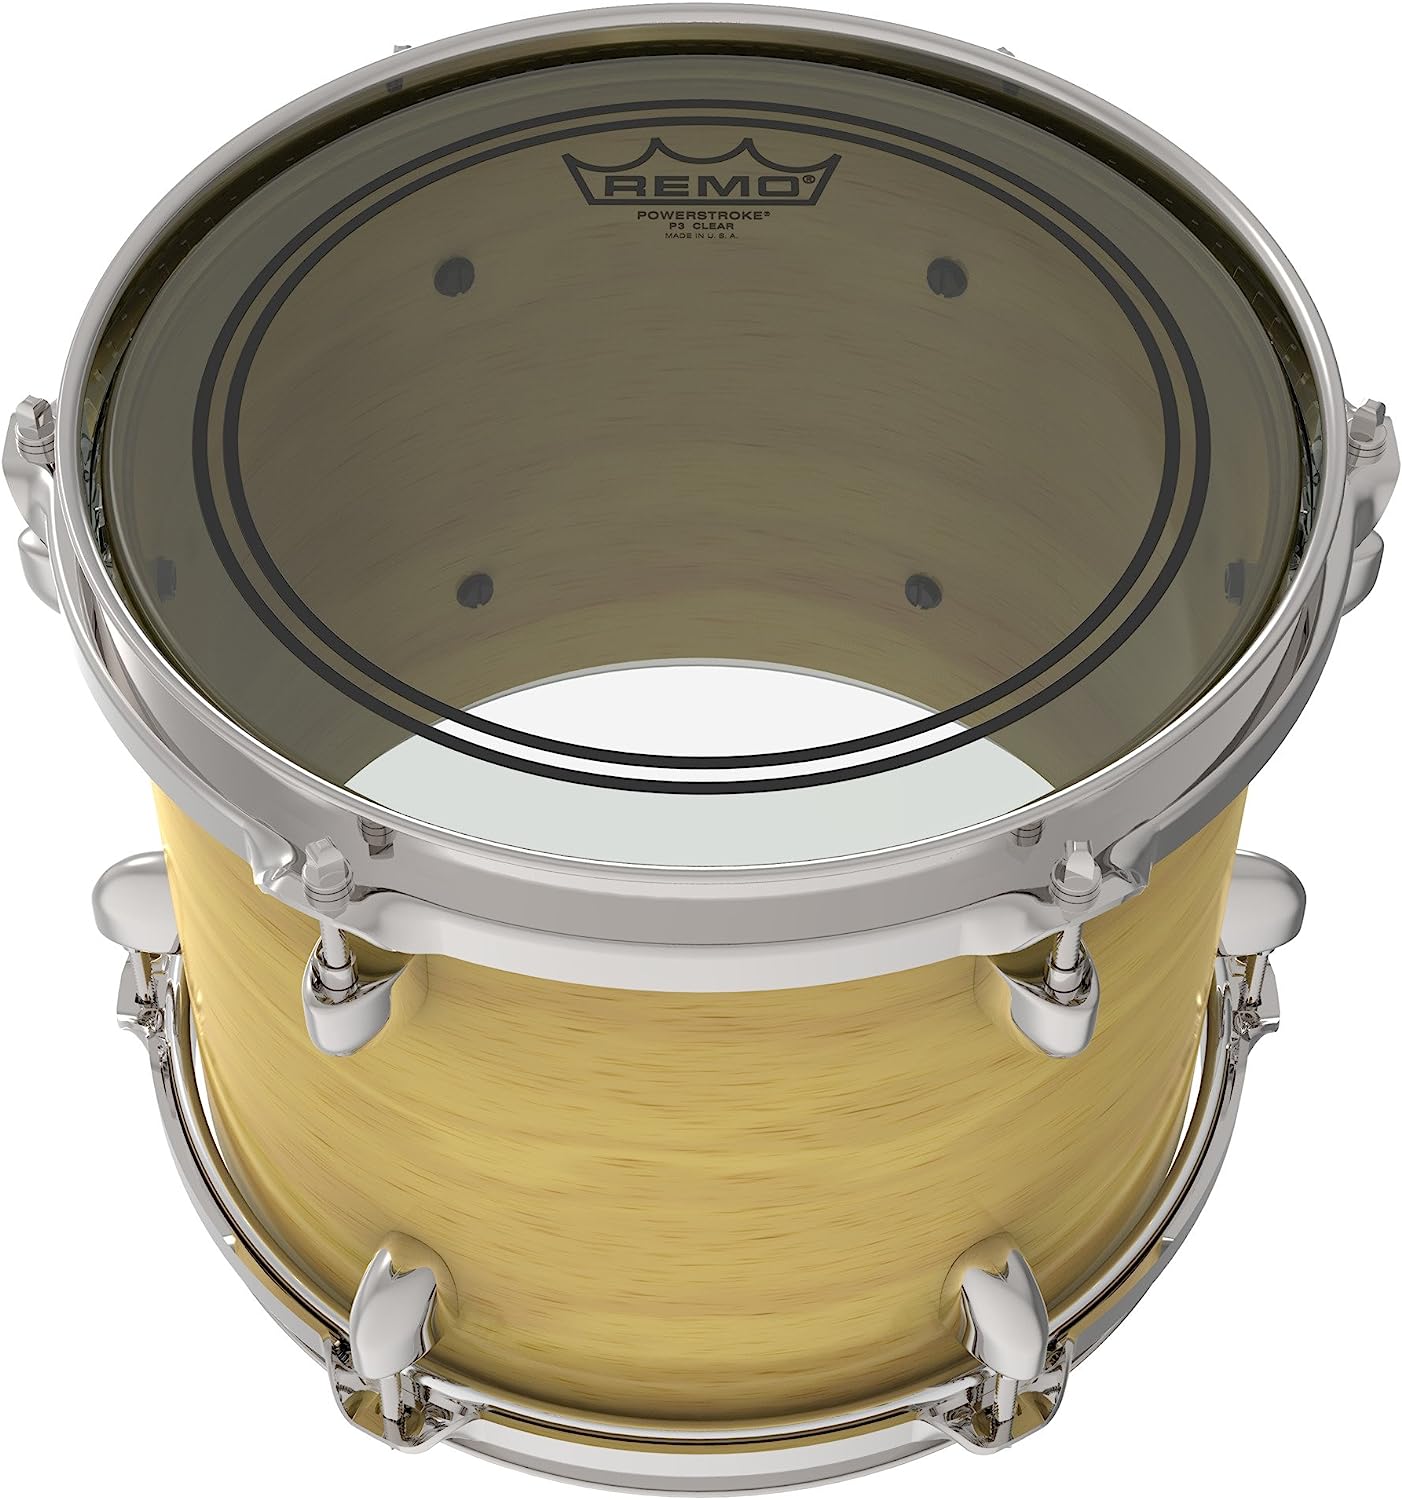 Remo P3-0312-BP, Batter, Powerstroke 3, Clear, Drum Head, 12 inch